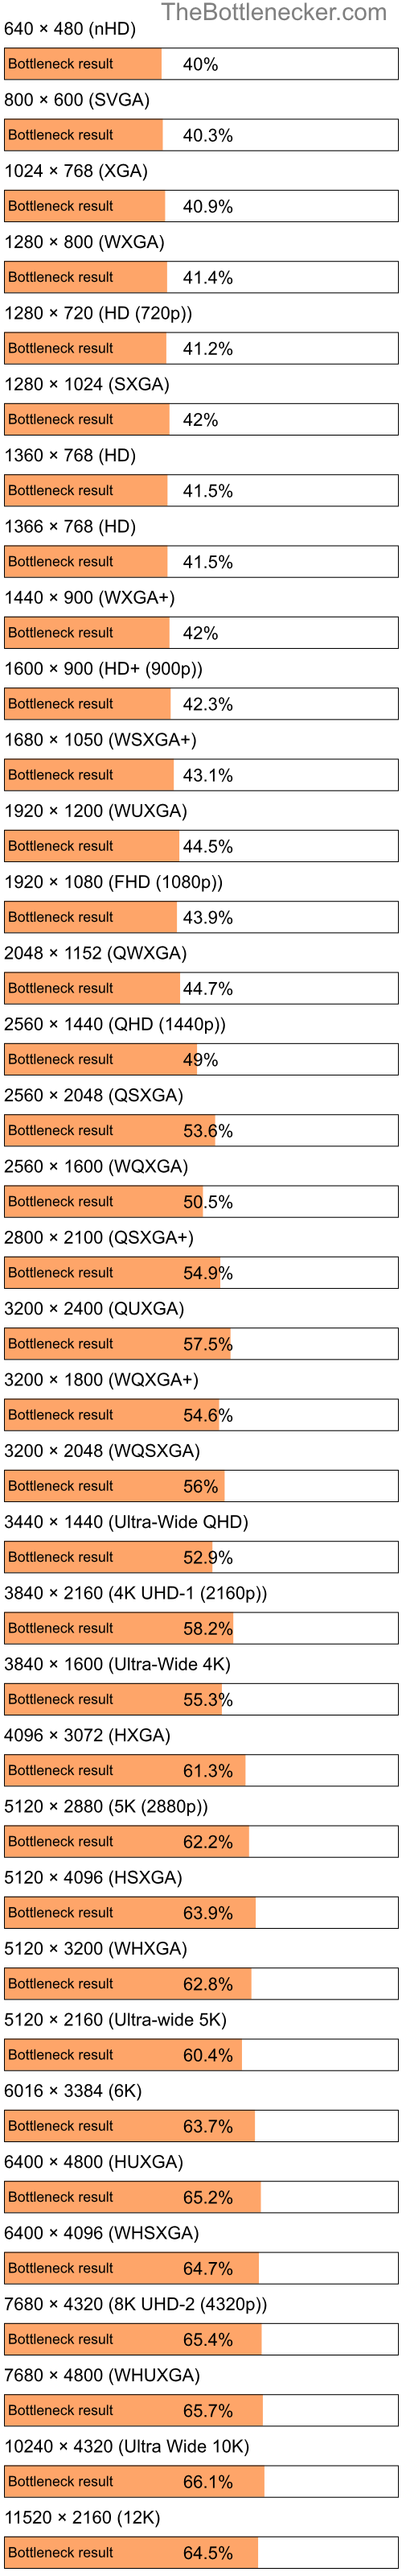 Bottleneck results by resolution for AMD Ryzen Threadripper PRO 5965WX and NVIDIA GeForce GTX 1050 Ti in General Tasks